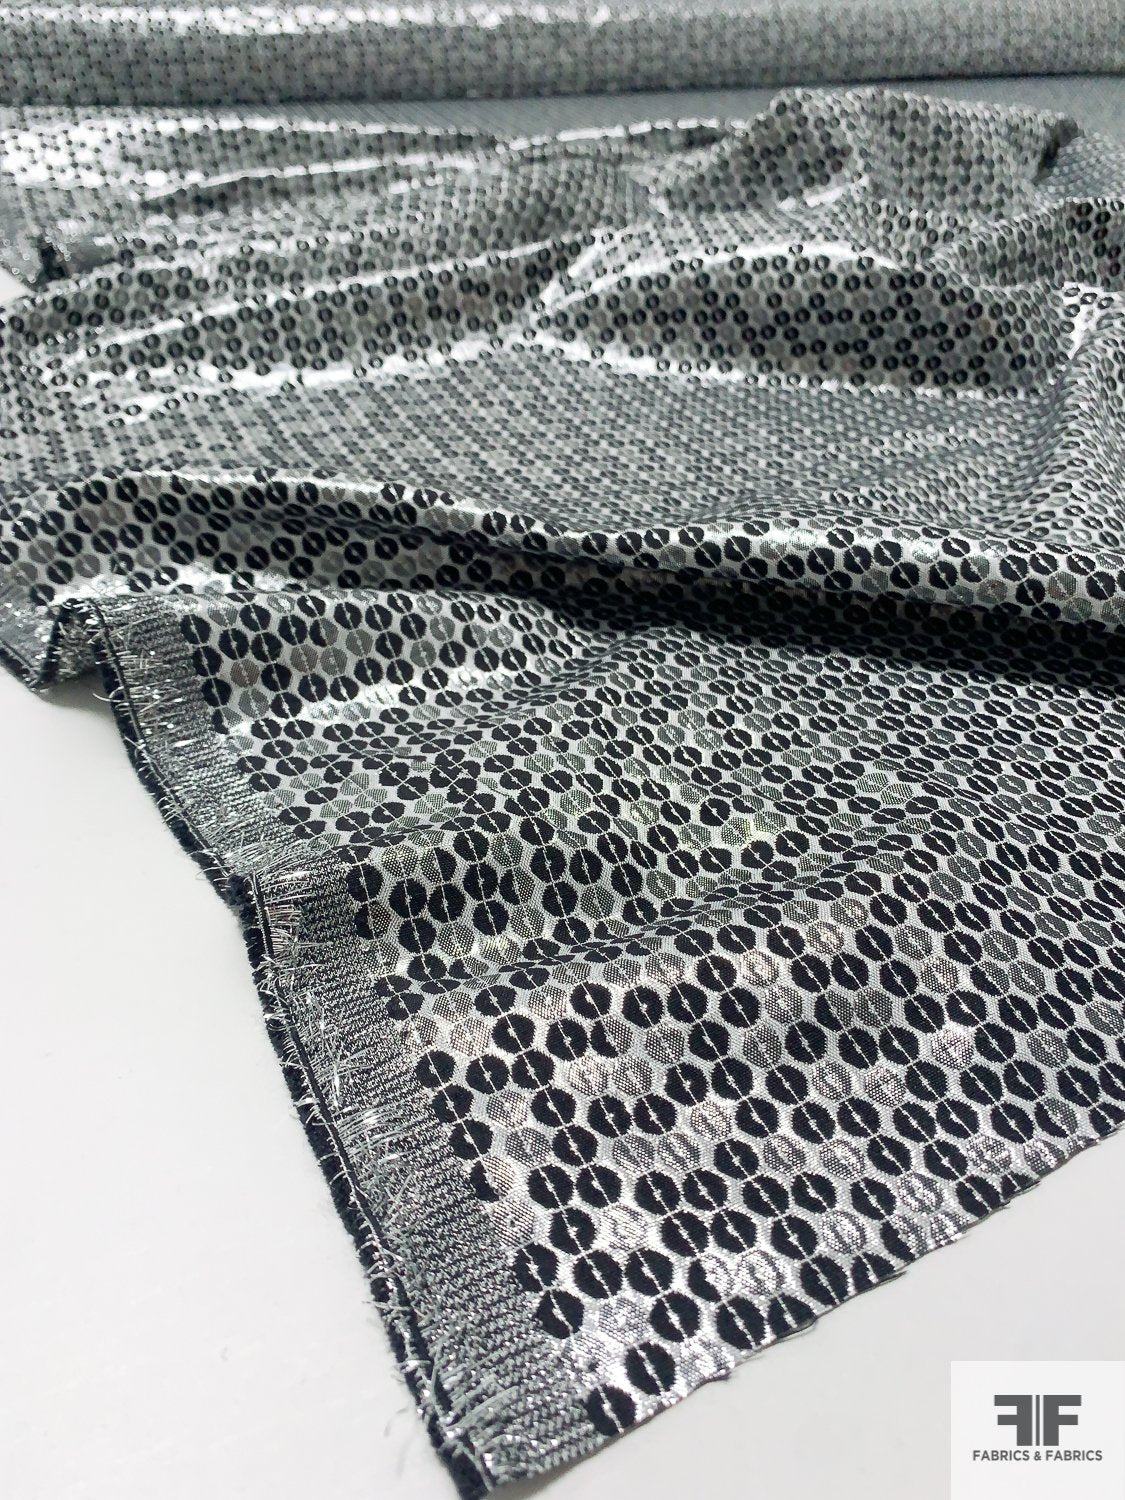 Sequined-Look Reversible Brocade Lamé - Black / White / Silver / Grey